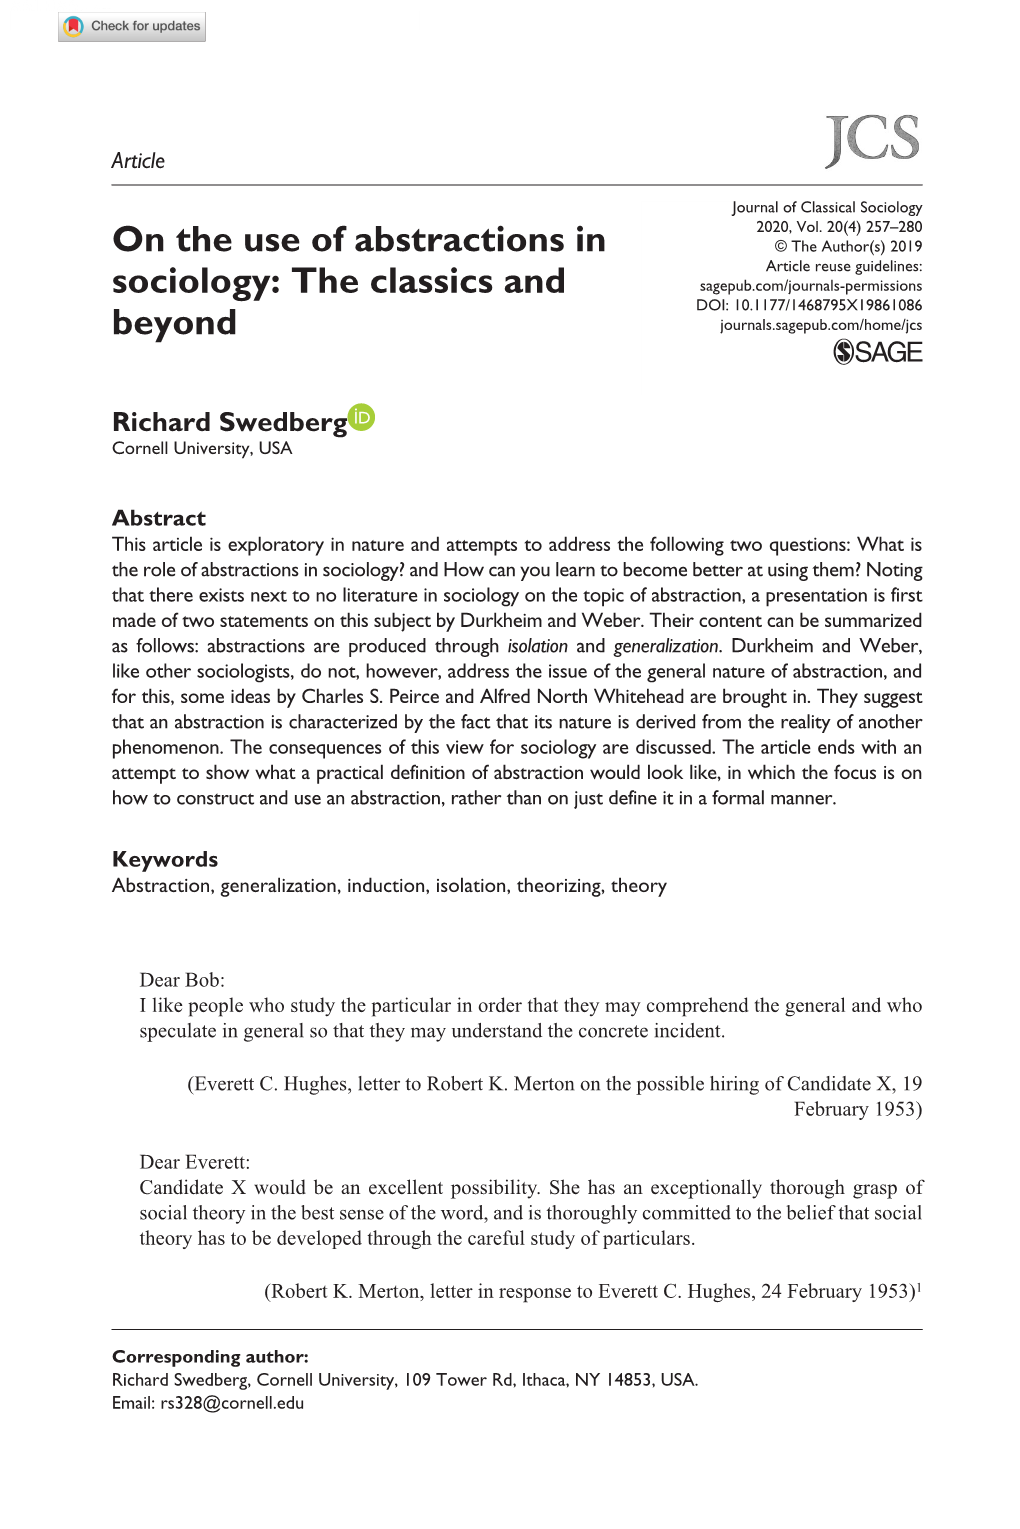 On the Use of Abstractions in Sociology: the Classics and Beyond